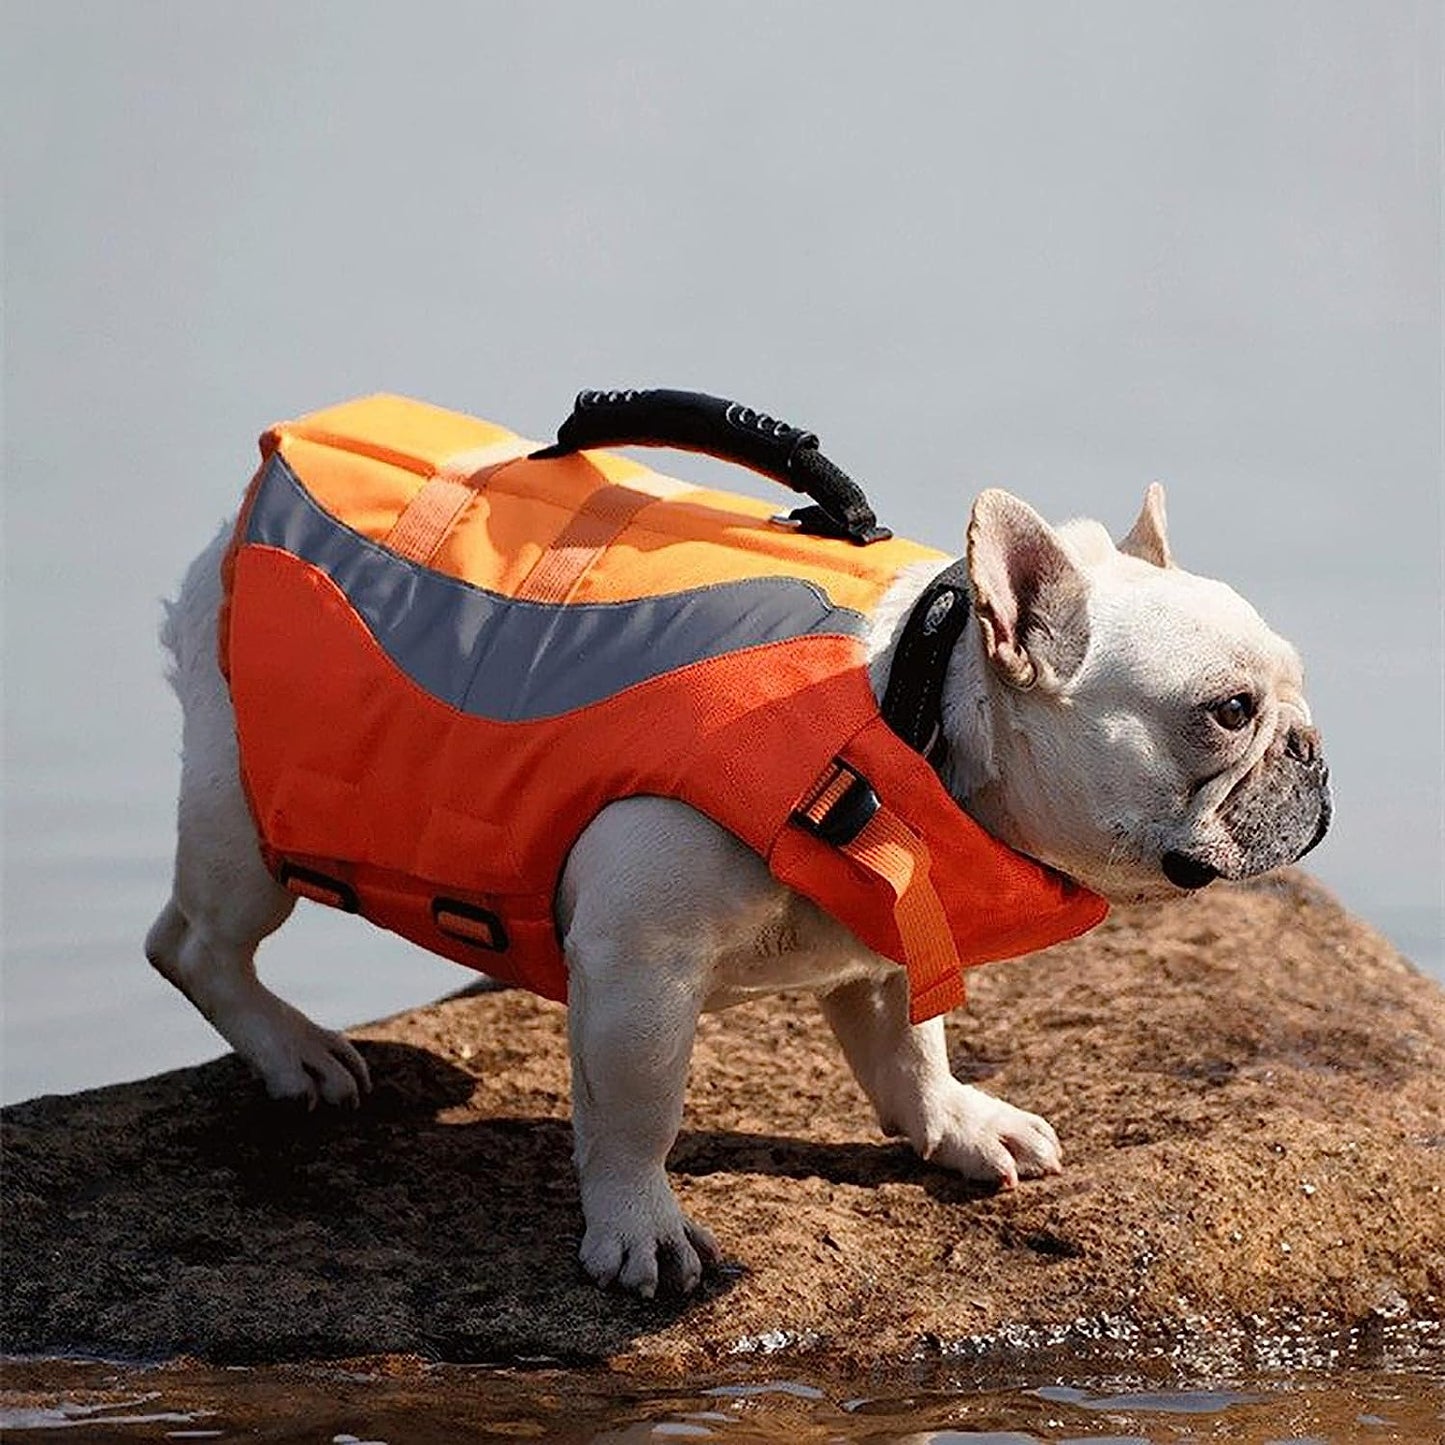 Reflective Life Jacket for Dogs